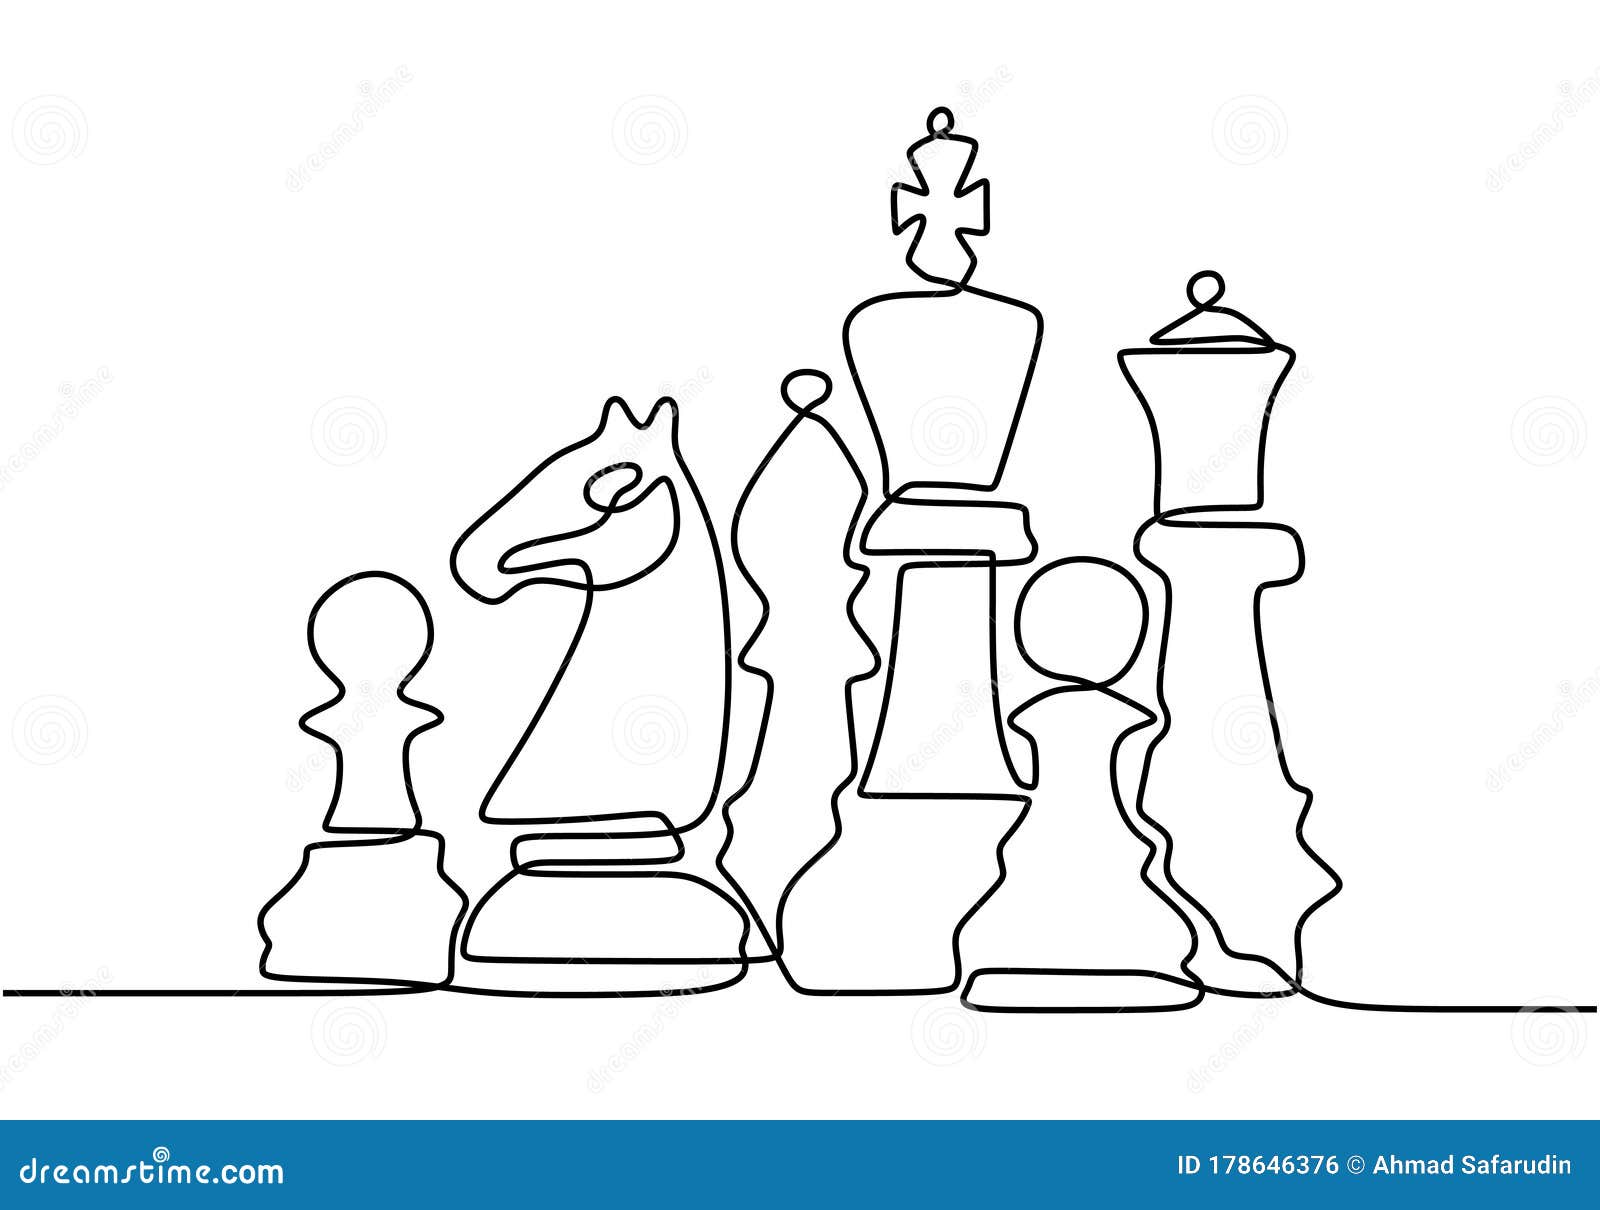 Chessboard drawing with figures Royalty Free Vector Image